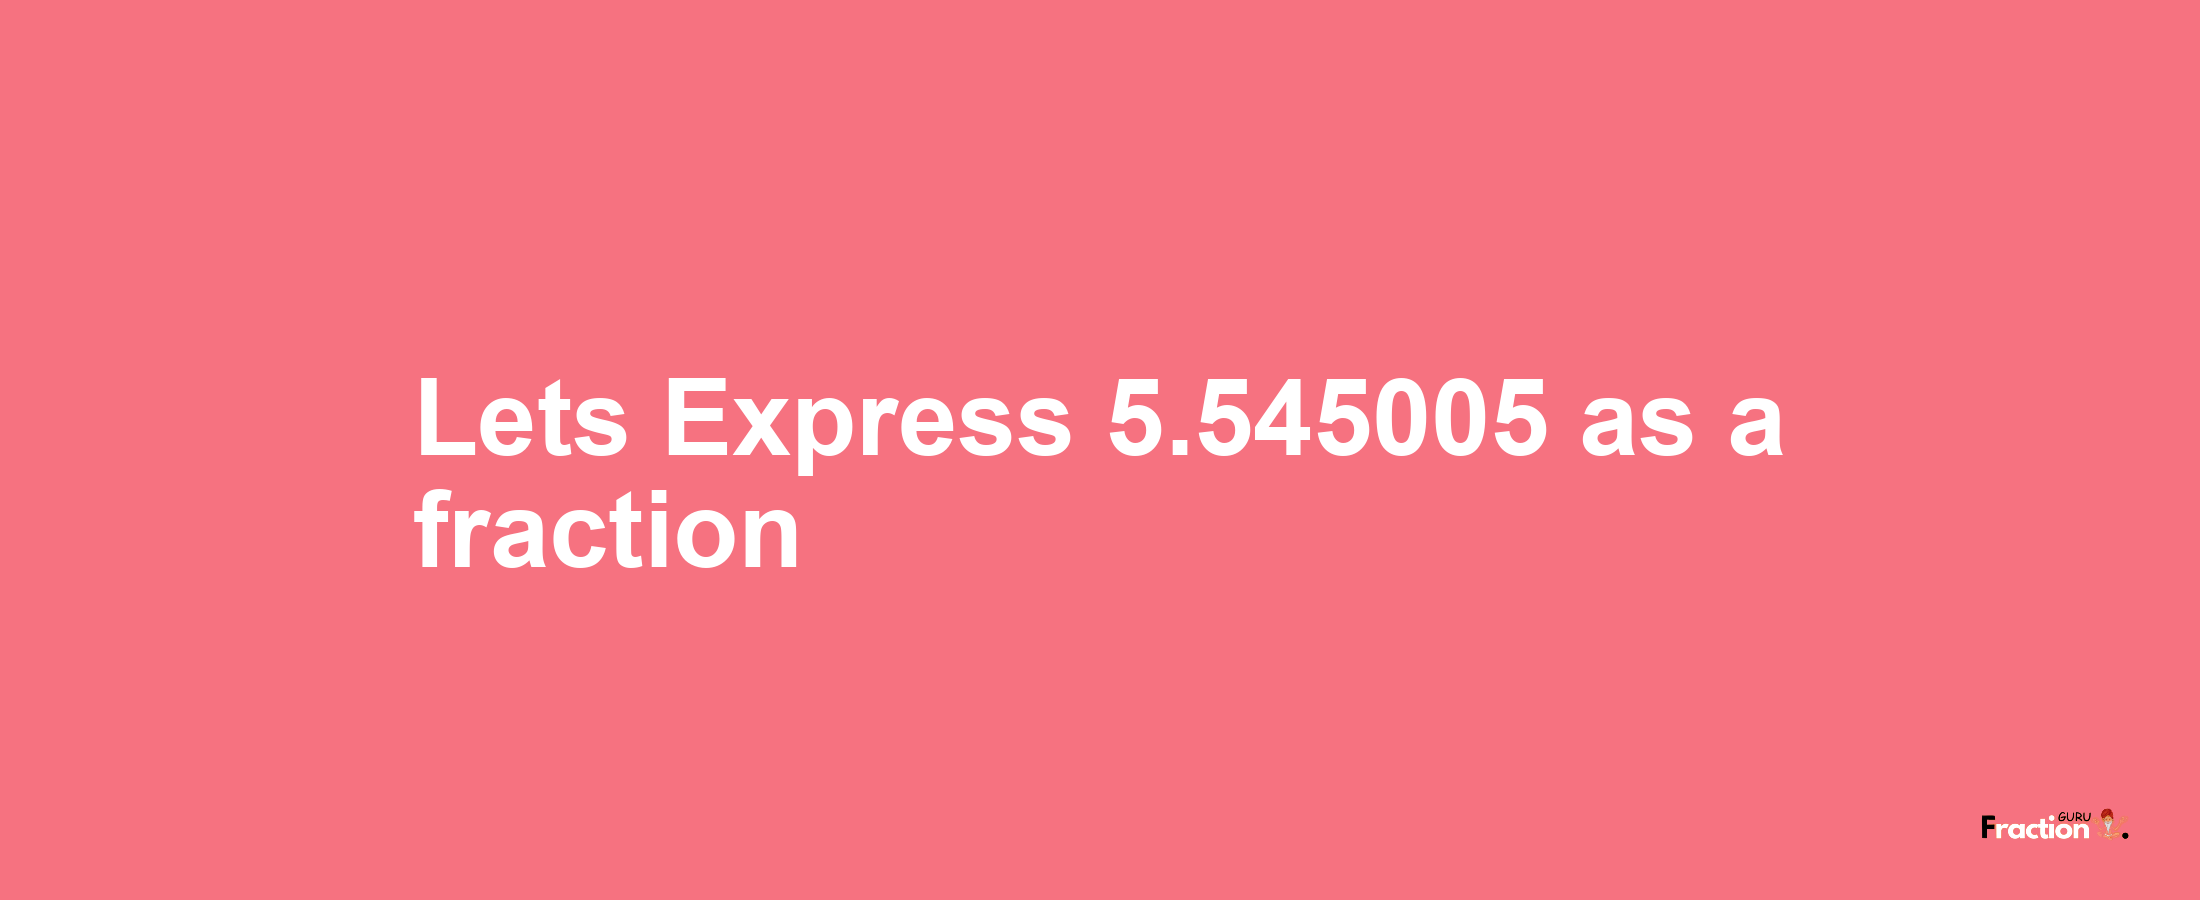 Lets Express 5.545005 as afraction